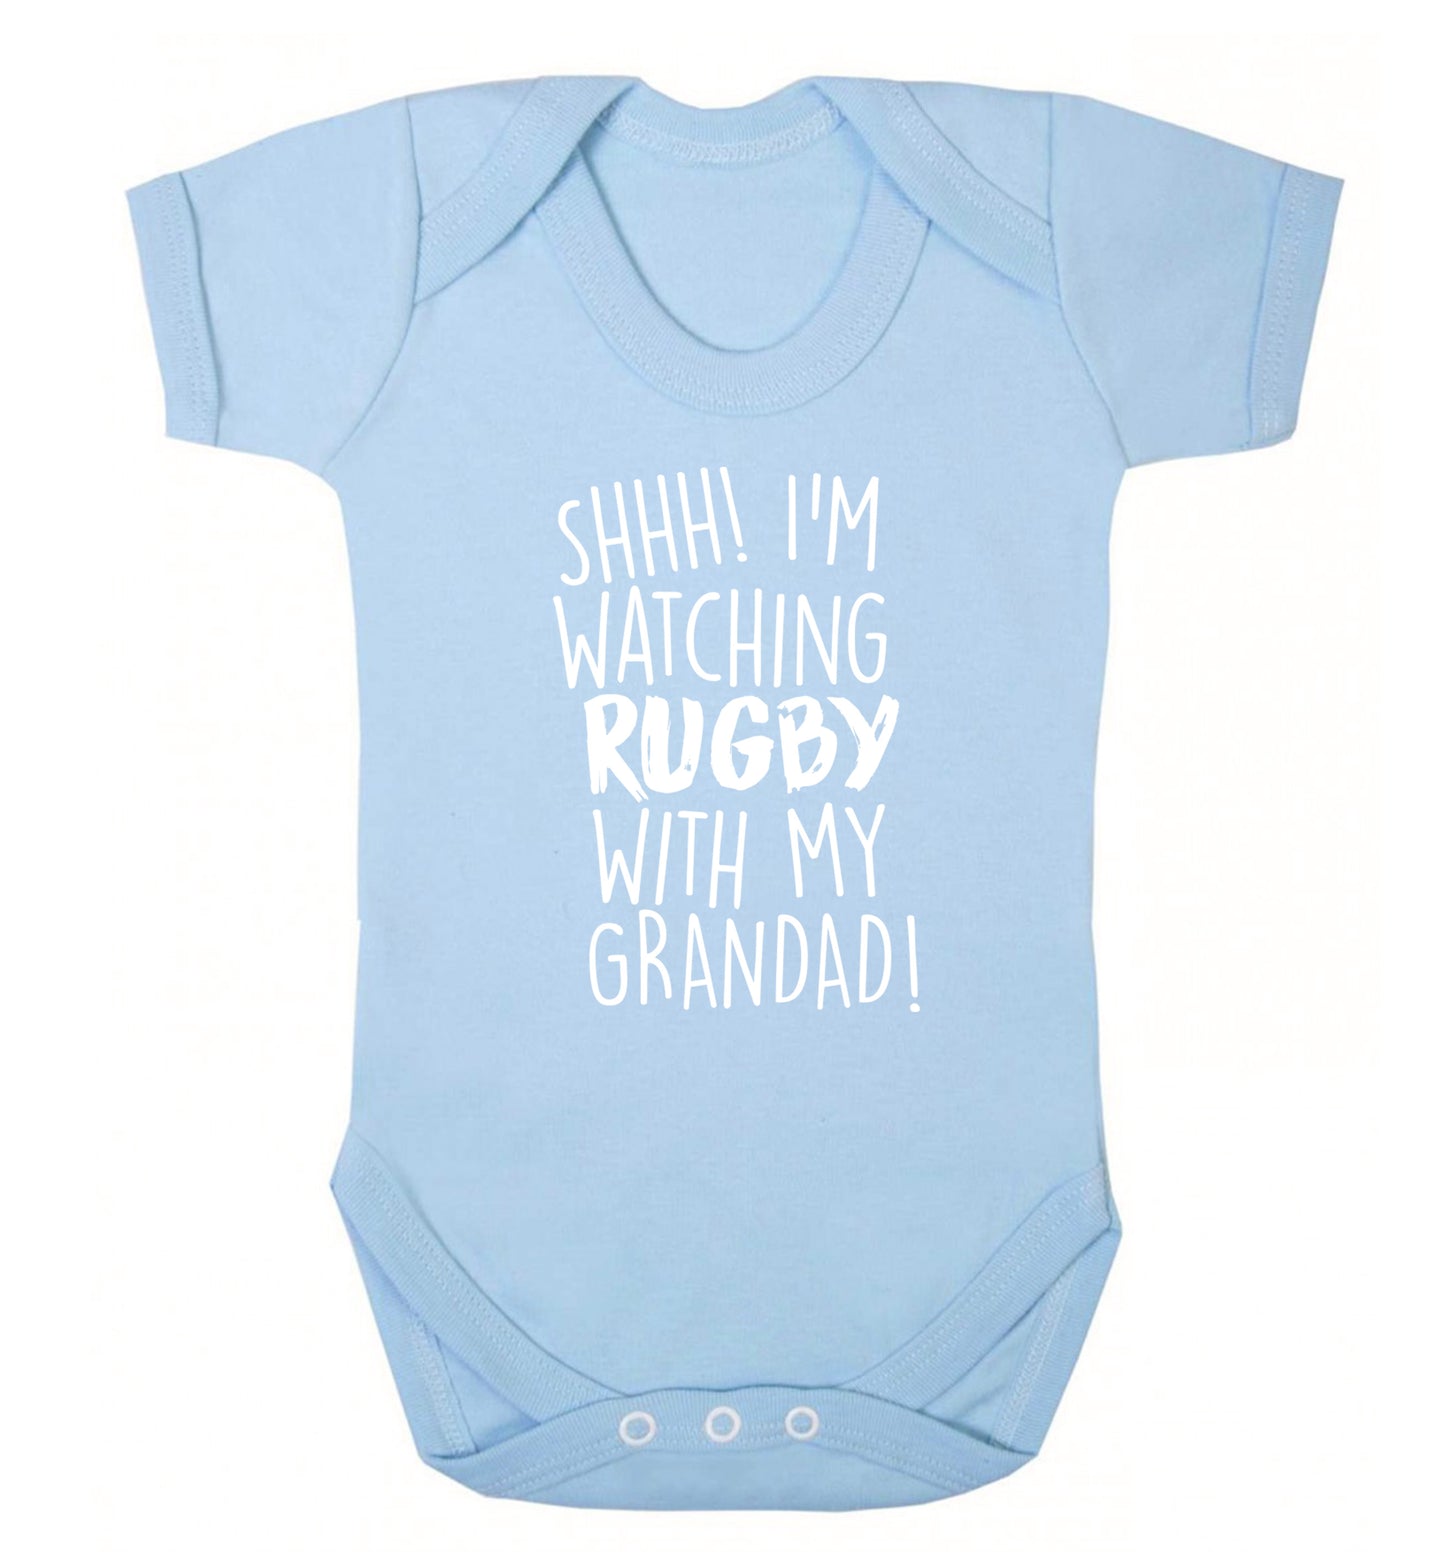 Shh I'm watching rugby with my grandad Baby Vest pale blue 18-24 months